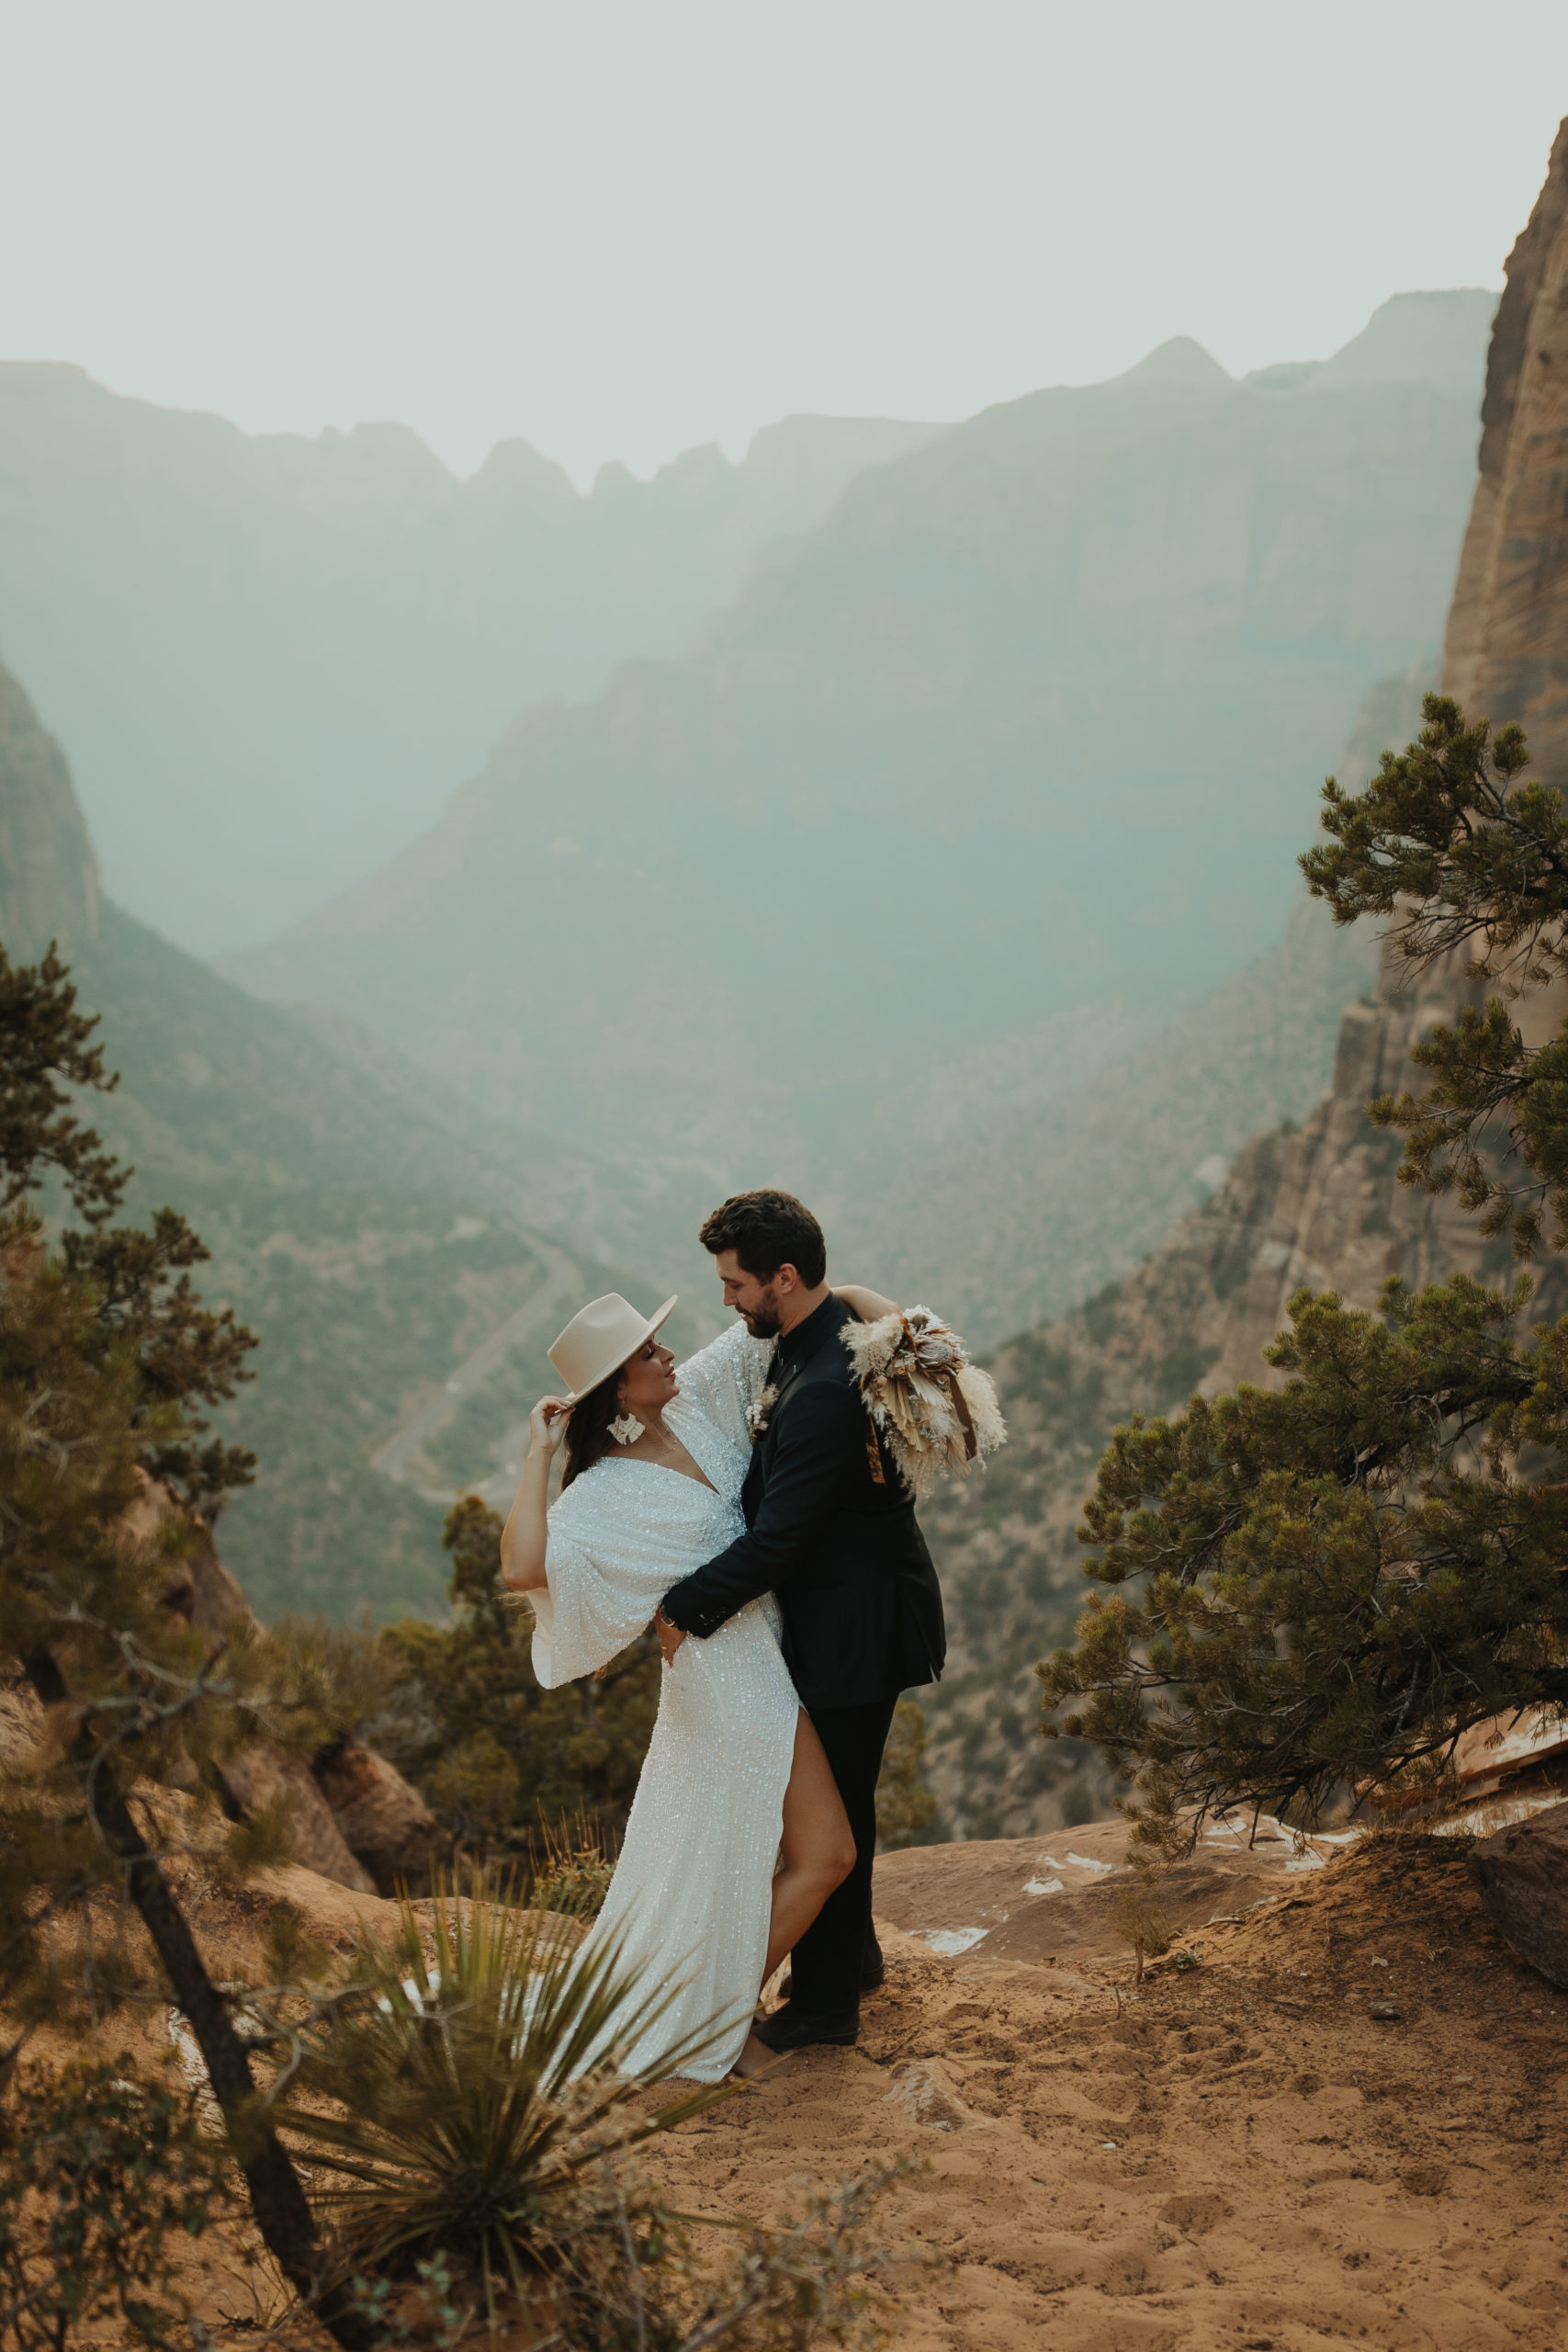 Couple in formal attire kissing with tan rocks behind them